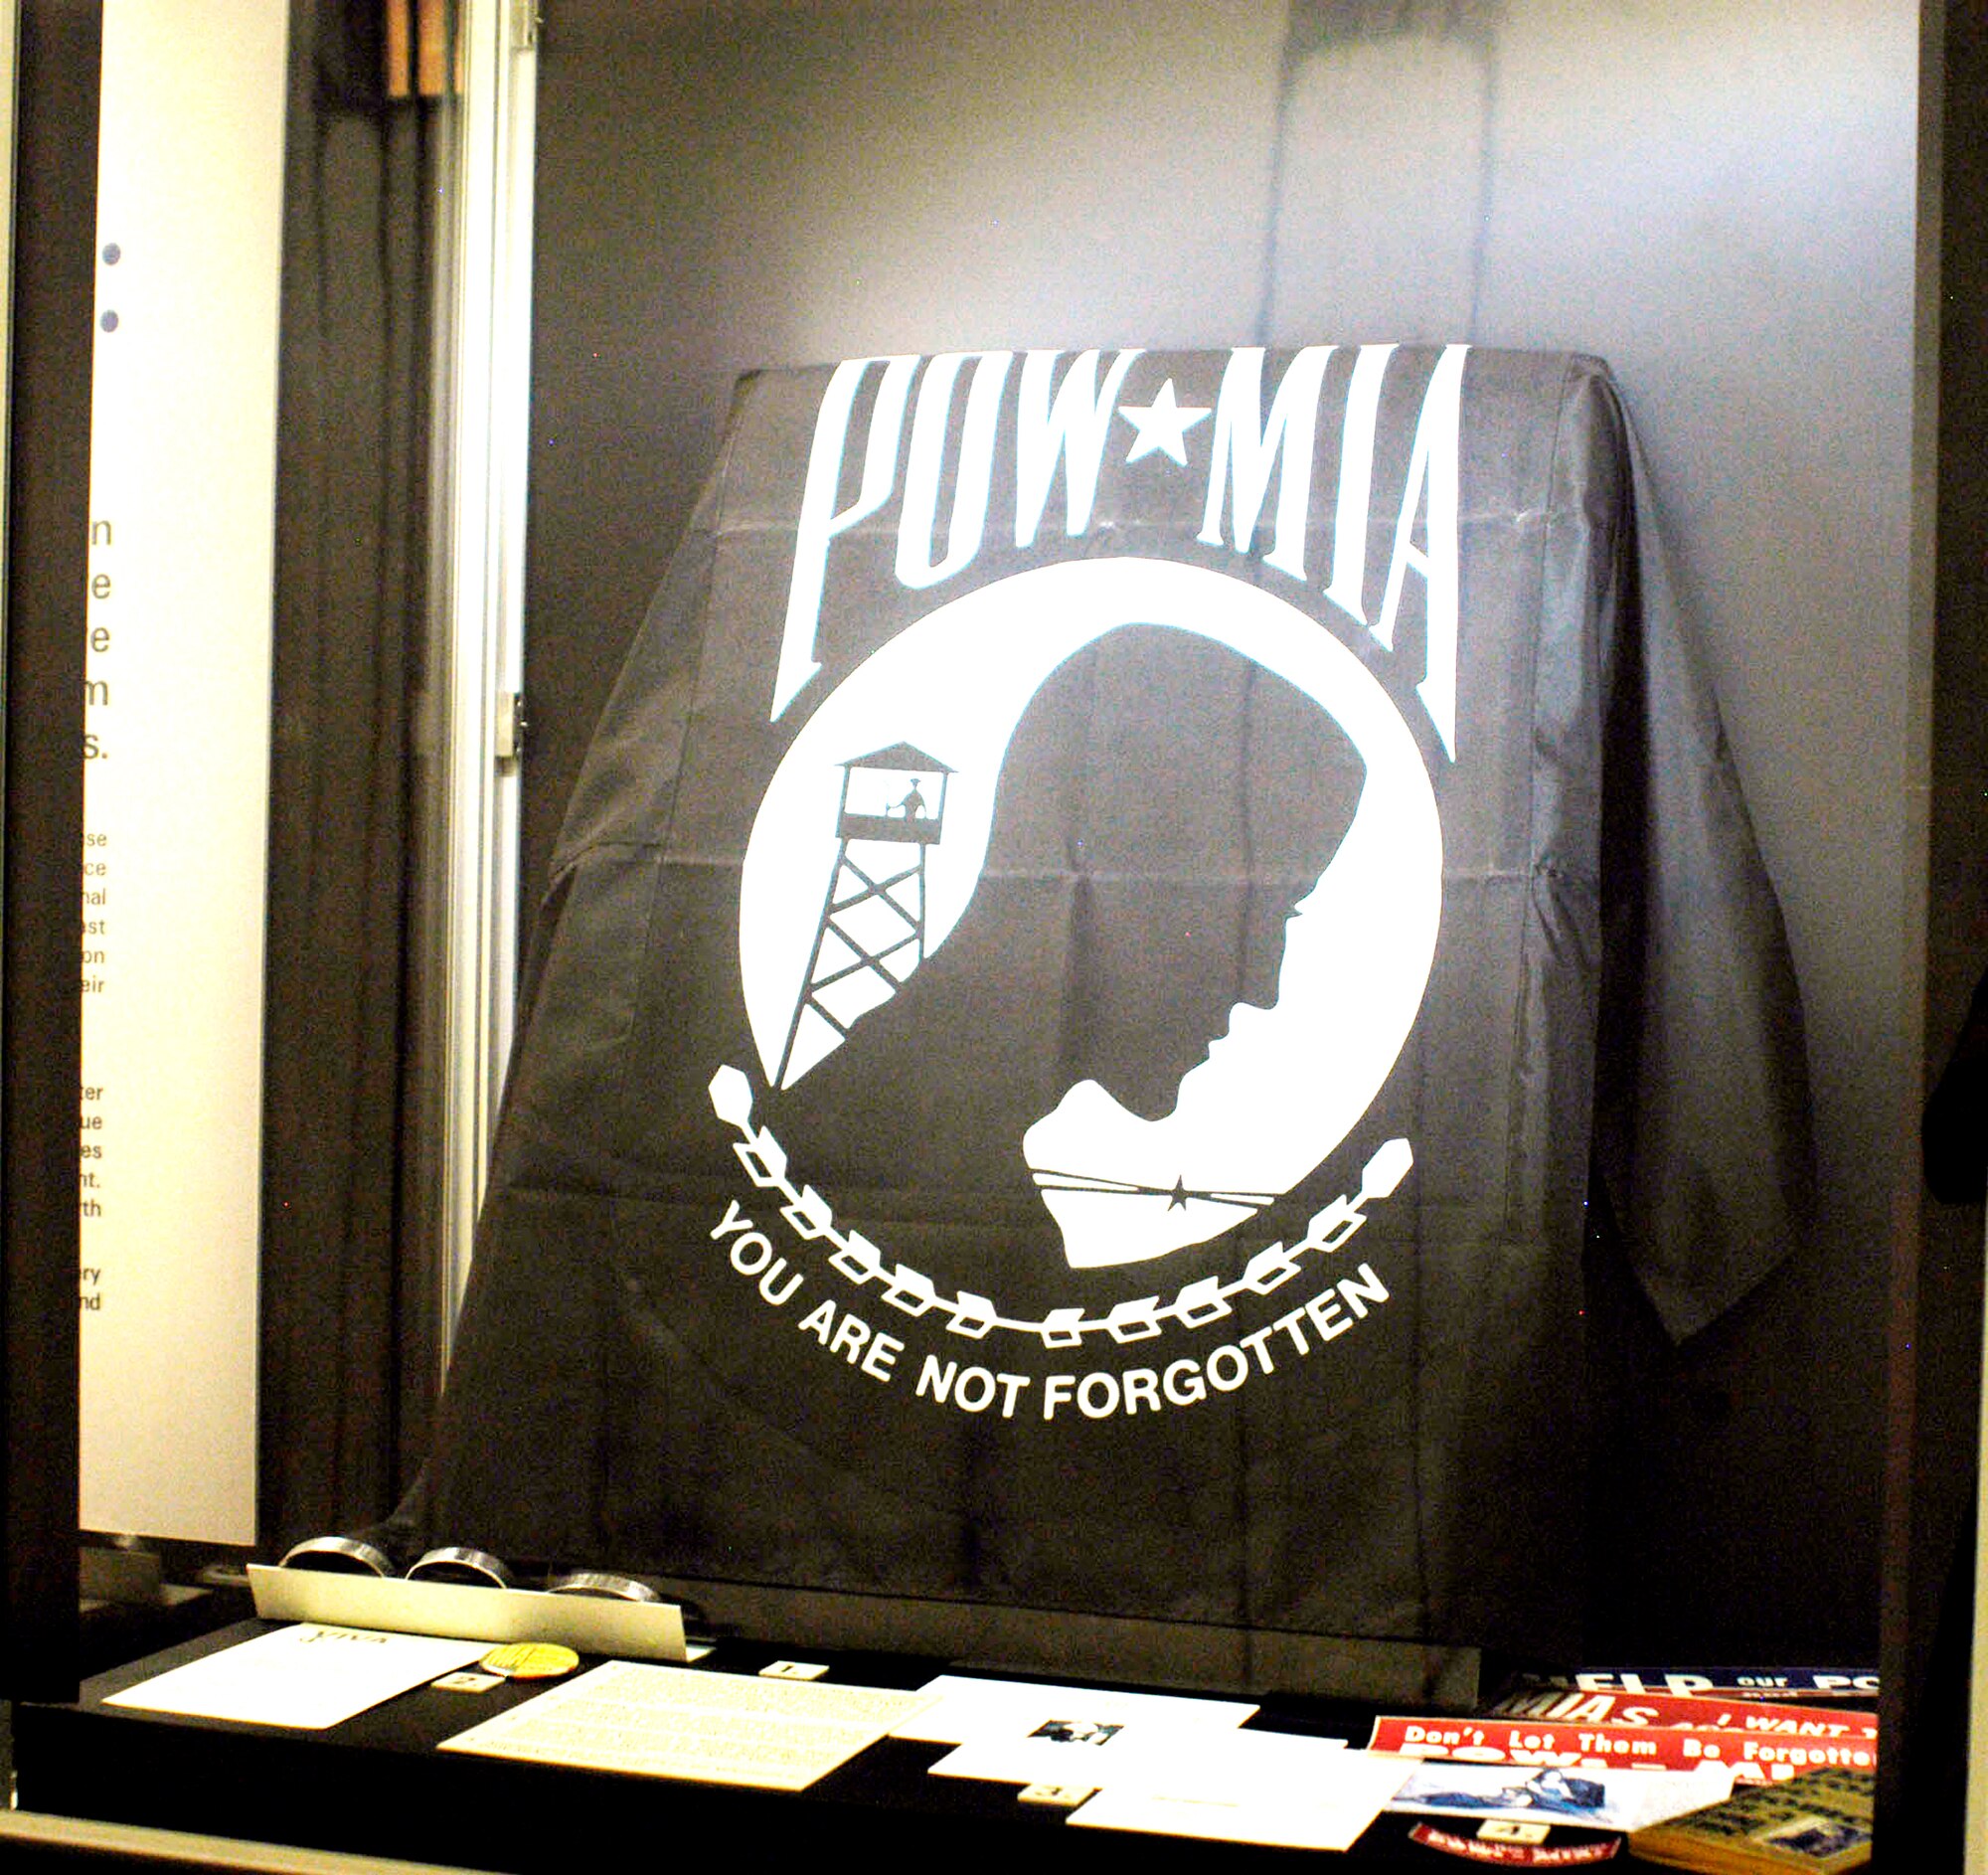 Articles in this display include a pre-addressed postcard to Ton Duc Thang, the president of North Vietnam, to enlist his support in determining the fate of Lt. Larry Potts at the National Museum of the U.S. Air Force in Dayton, Ohio. Despite repeated appeals like this one, North Vietnam remained unsympathetic. The black flag is the official POW/MIA flag, which is flown six times a year at designated federal sites. It was designed in 1971 by Newt Heisley, a World War II pilot and advertising artist who never profited from the uncopyrighted design. (U.S. Air Force photo)